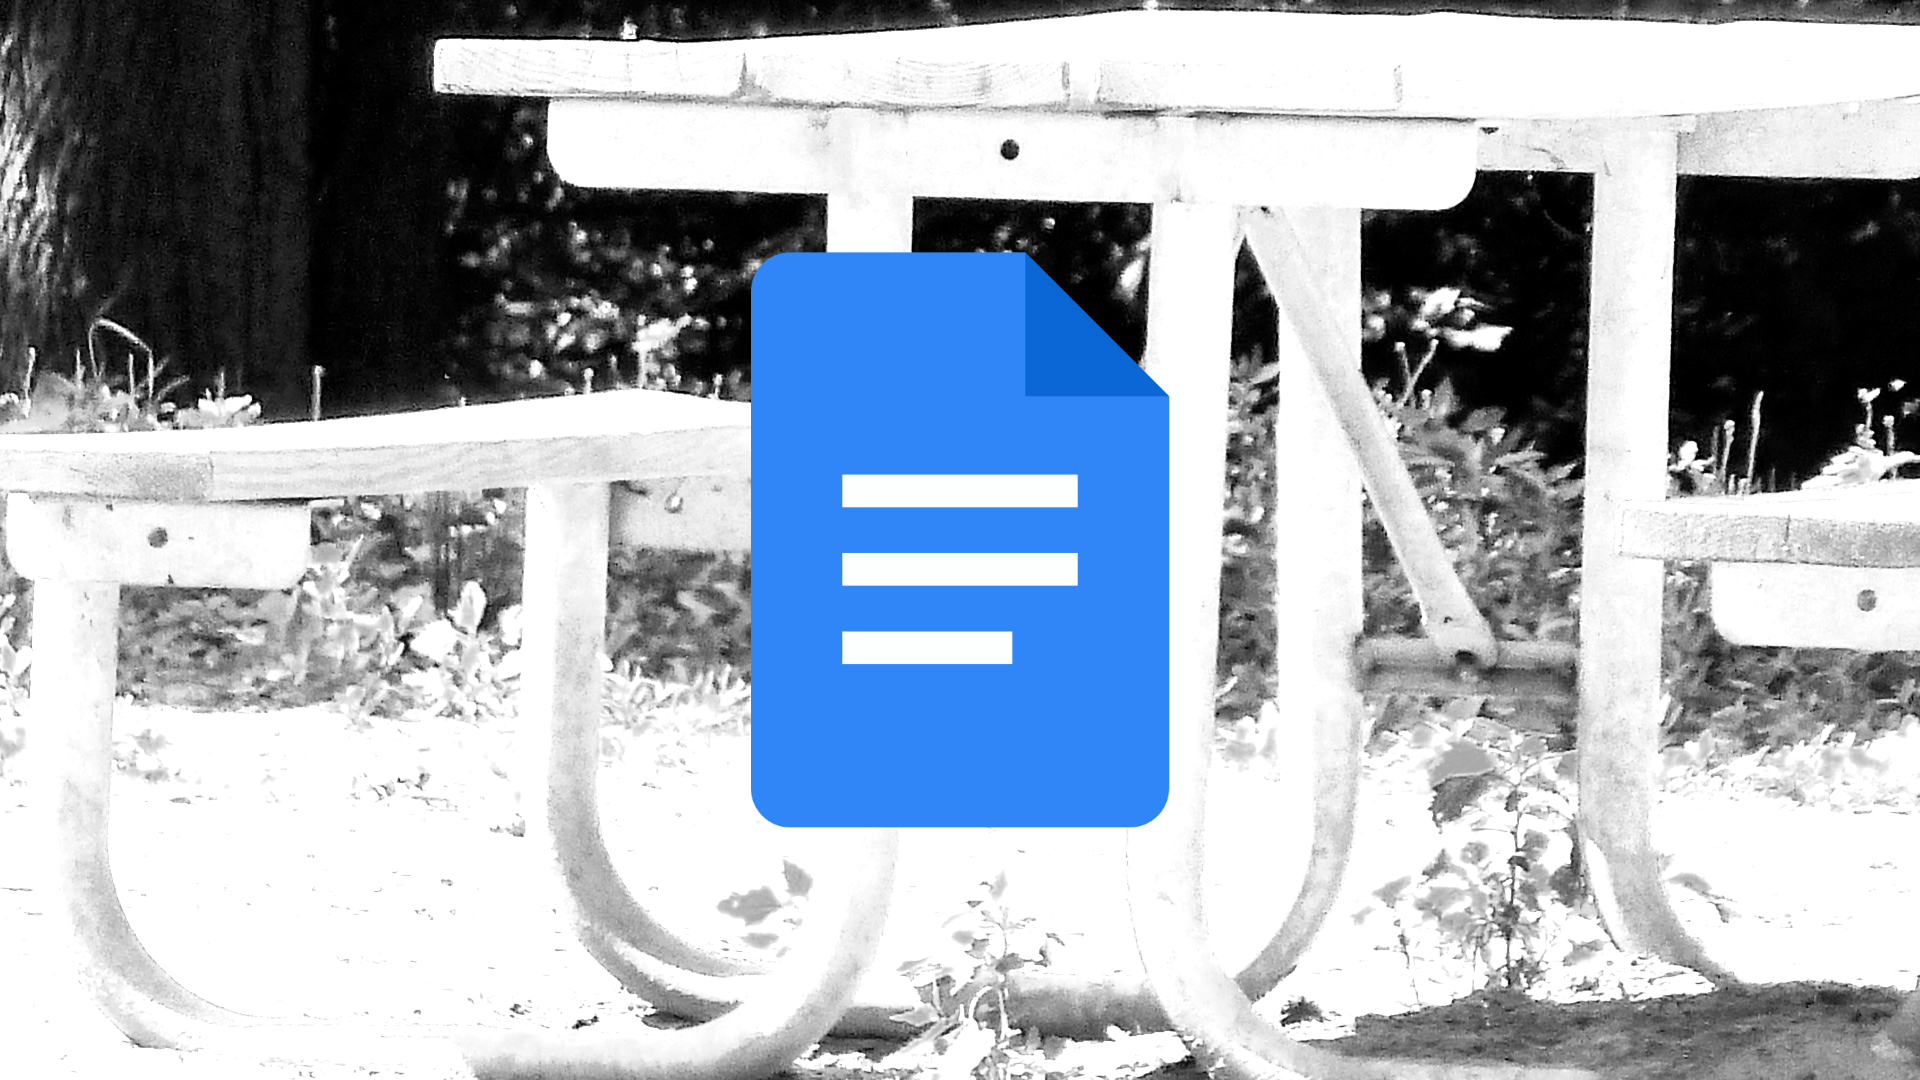 The Google Docs logo with a black-and-white image of a picnic table in the background